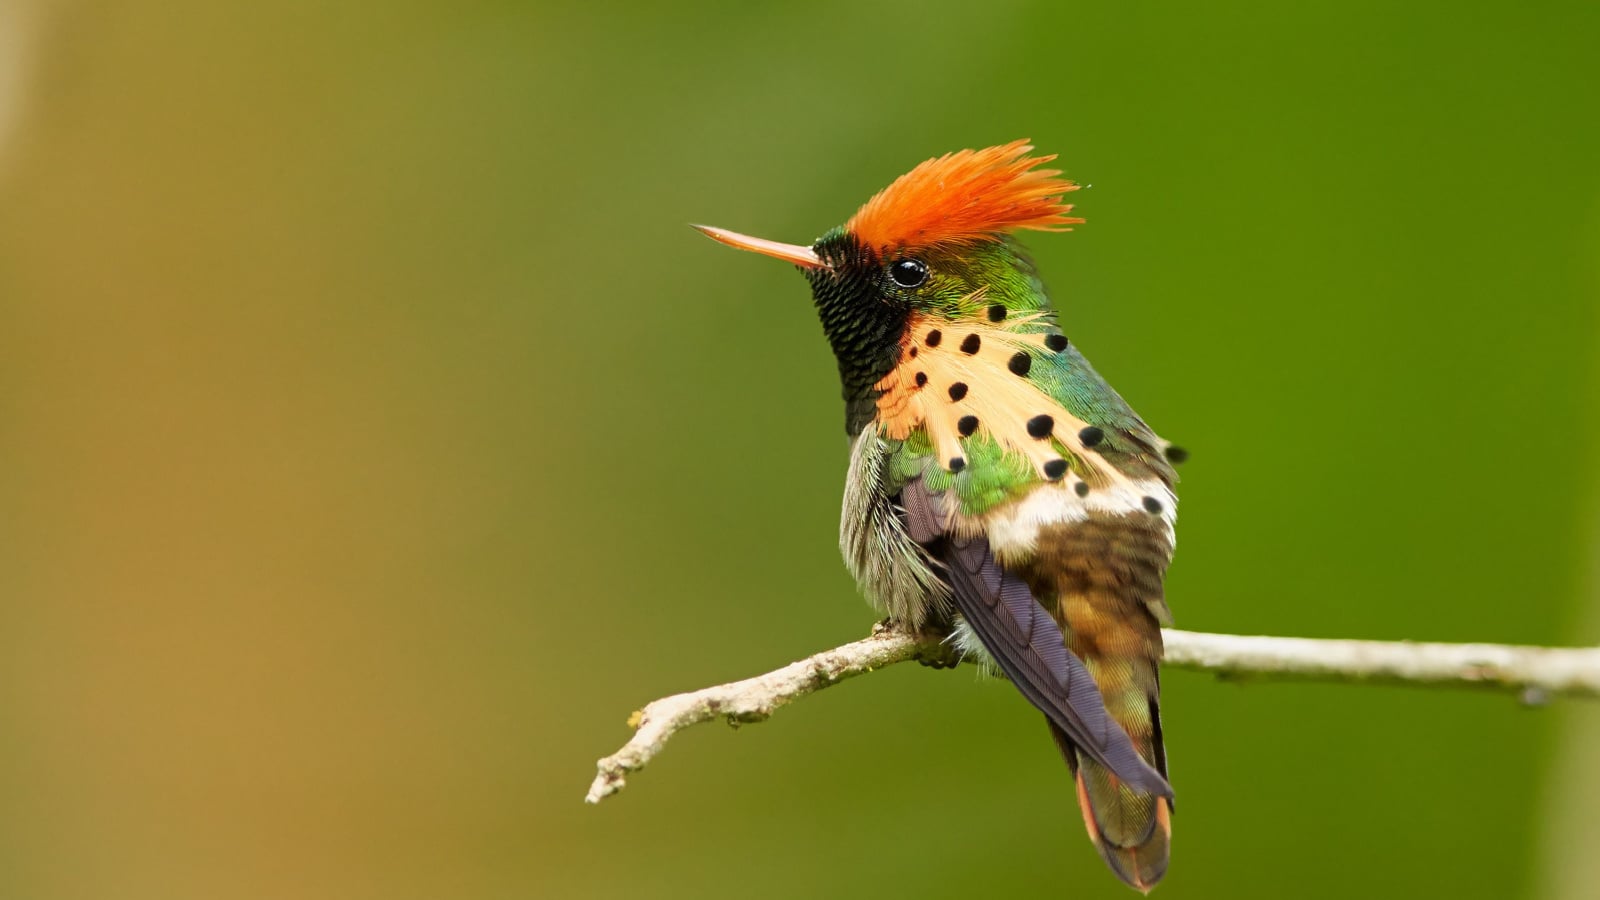 Striking caribbean hummingbird, isolated Tufted Coquette, Lophornis ornatus perched on twisted twig, showing its beautiful rufous crest and spotted plumes. Side view. Arima Valley, Trinidad.